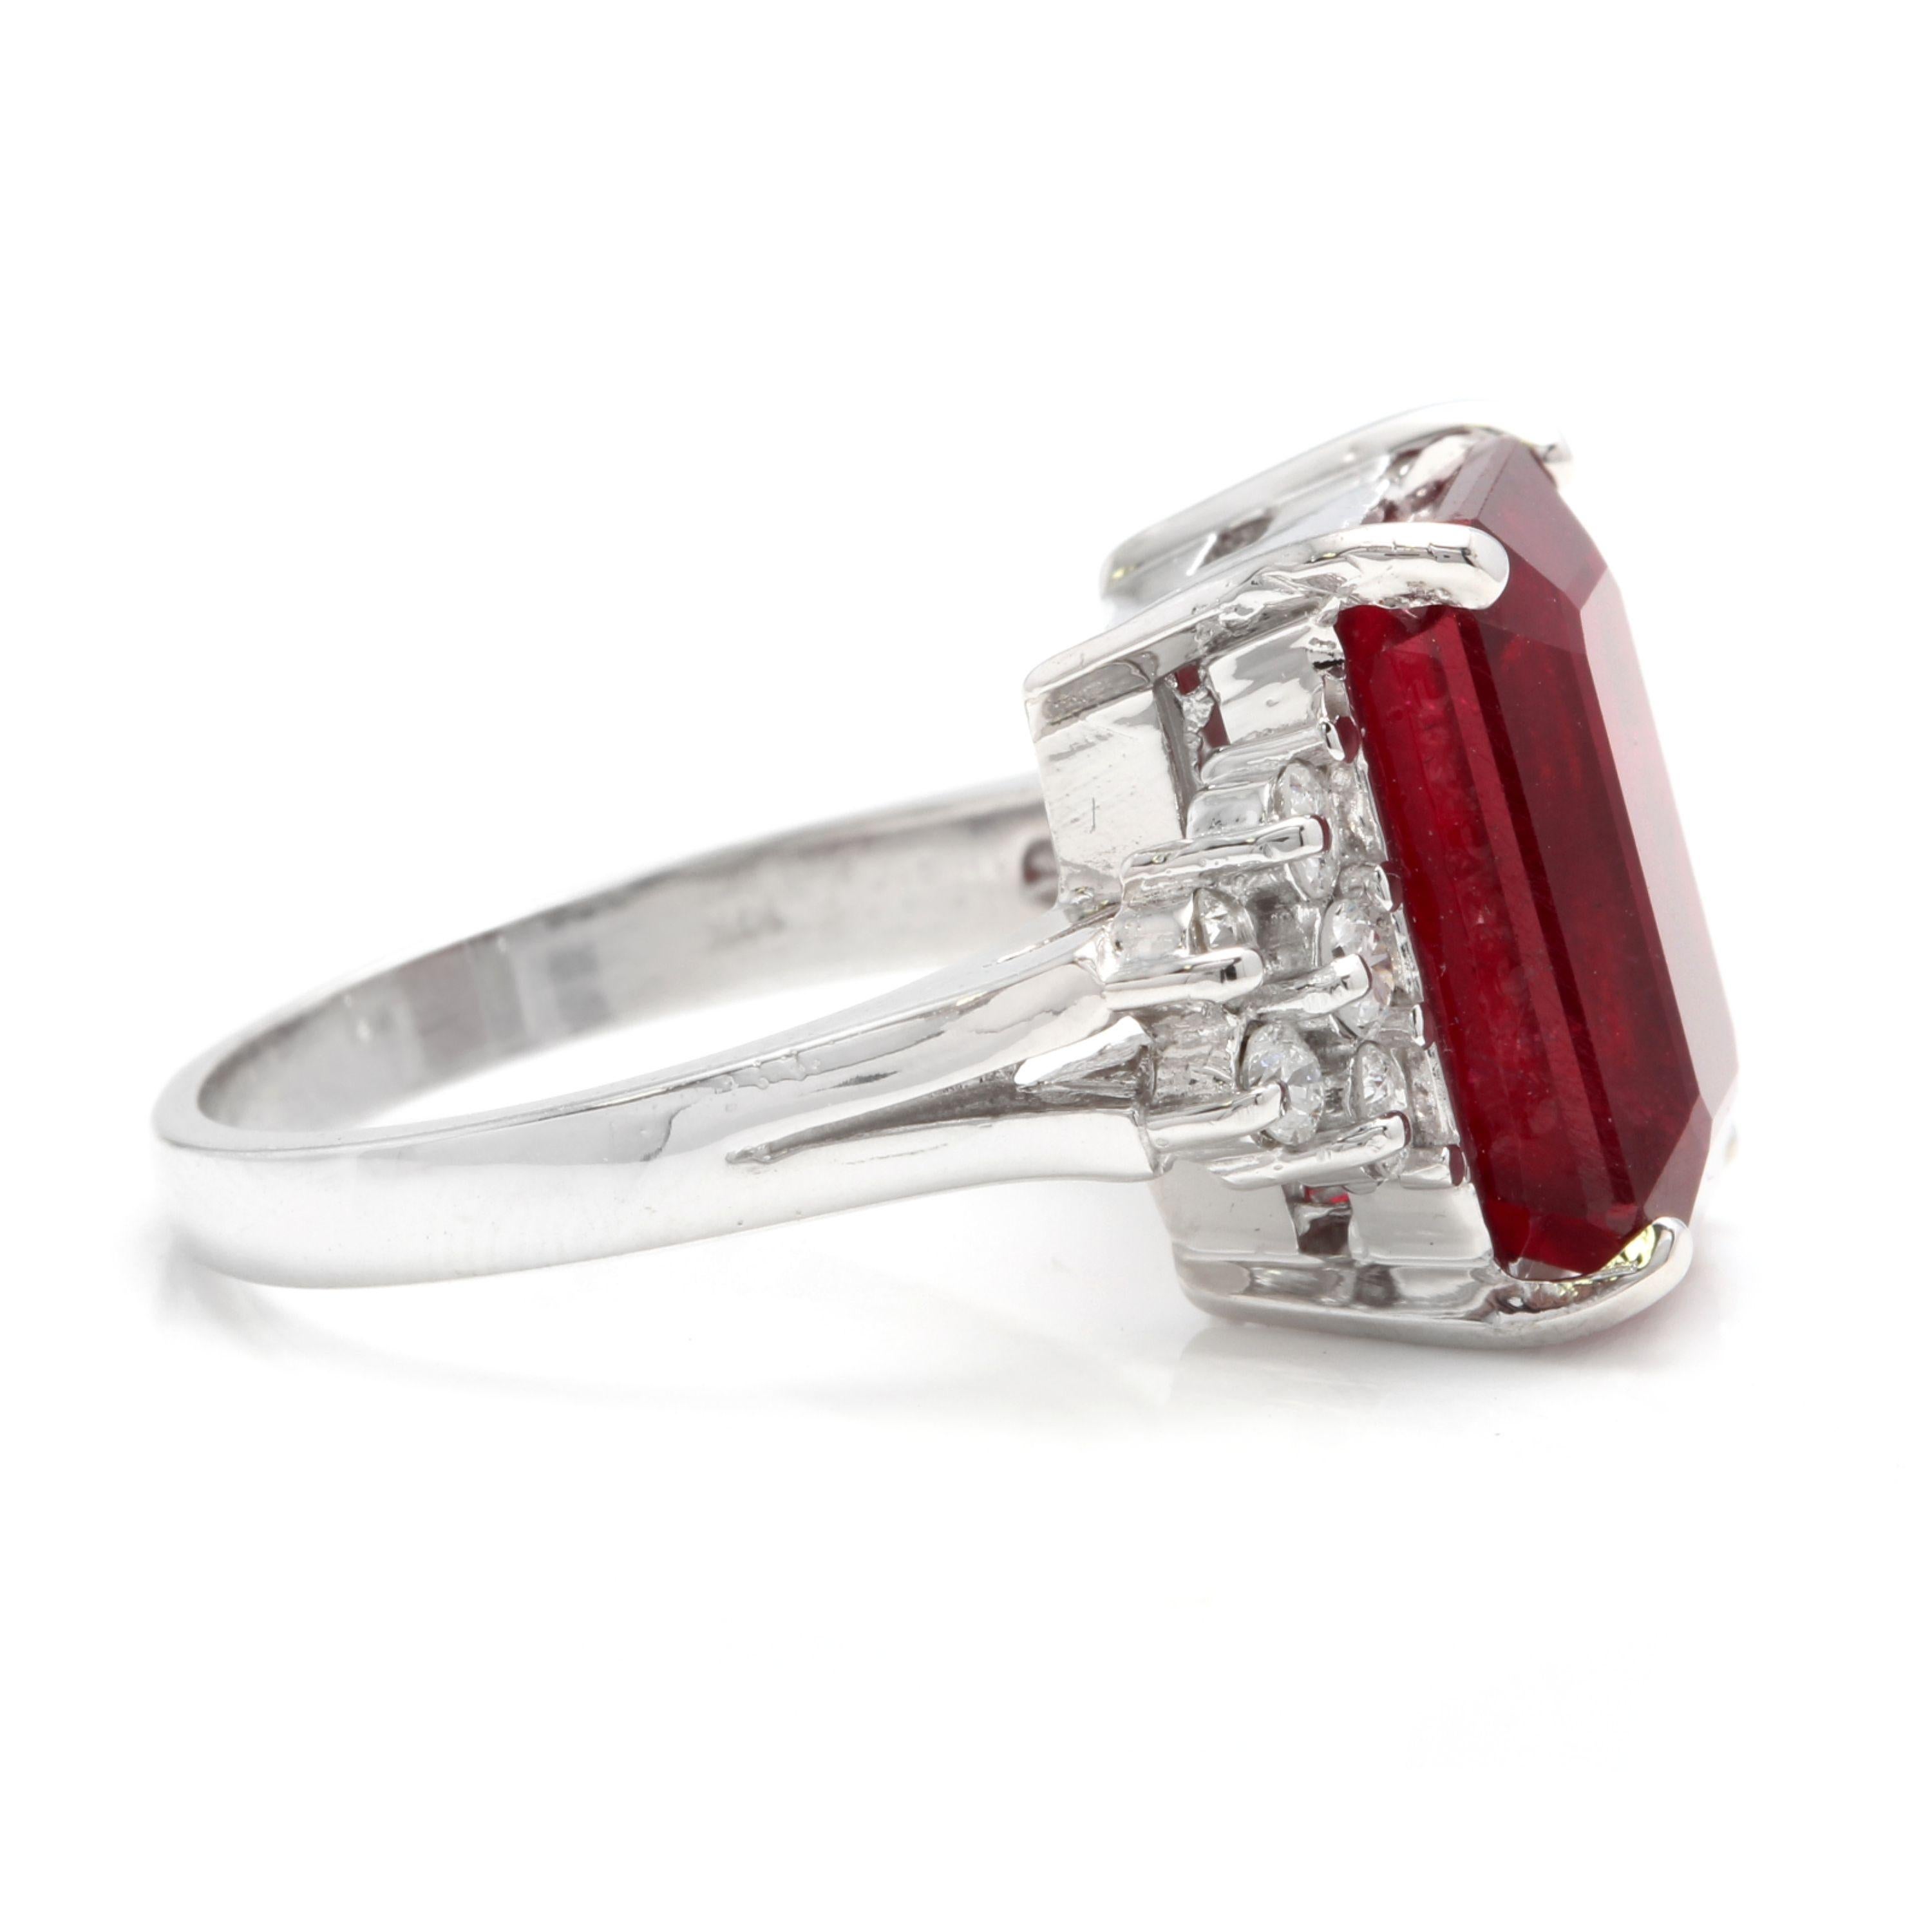 Mixed Cut 13.60 Carat Impressive Natural Red Ruby and Diamond 14 Karat White Gold Ring For Sale